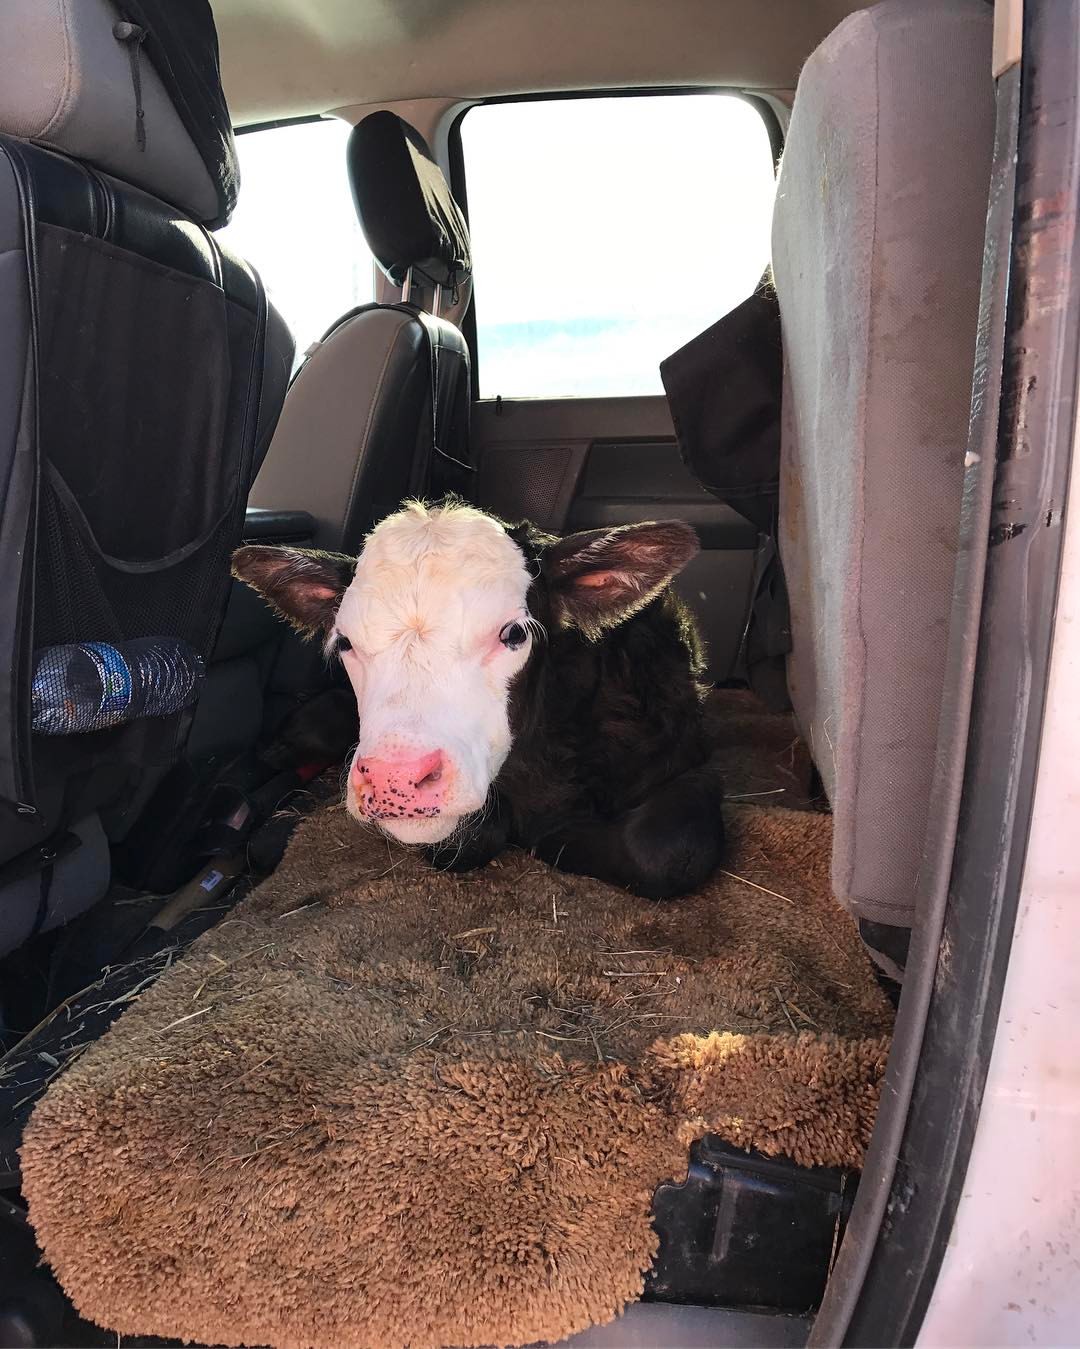 New born warming up in the back seat